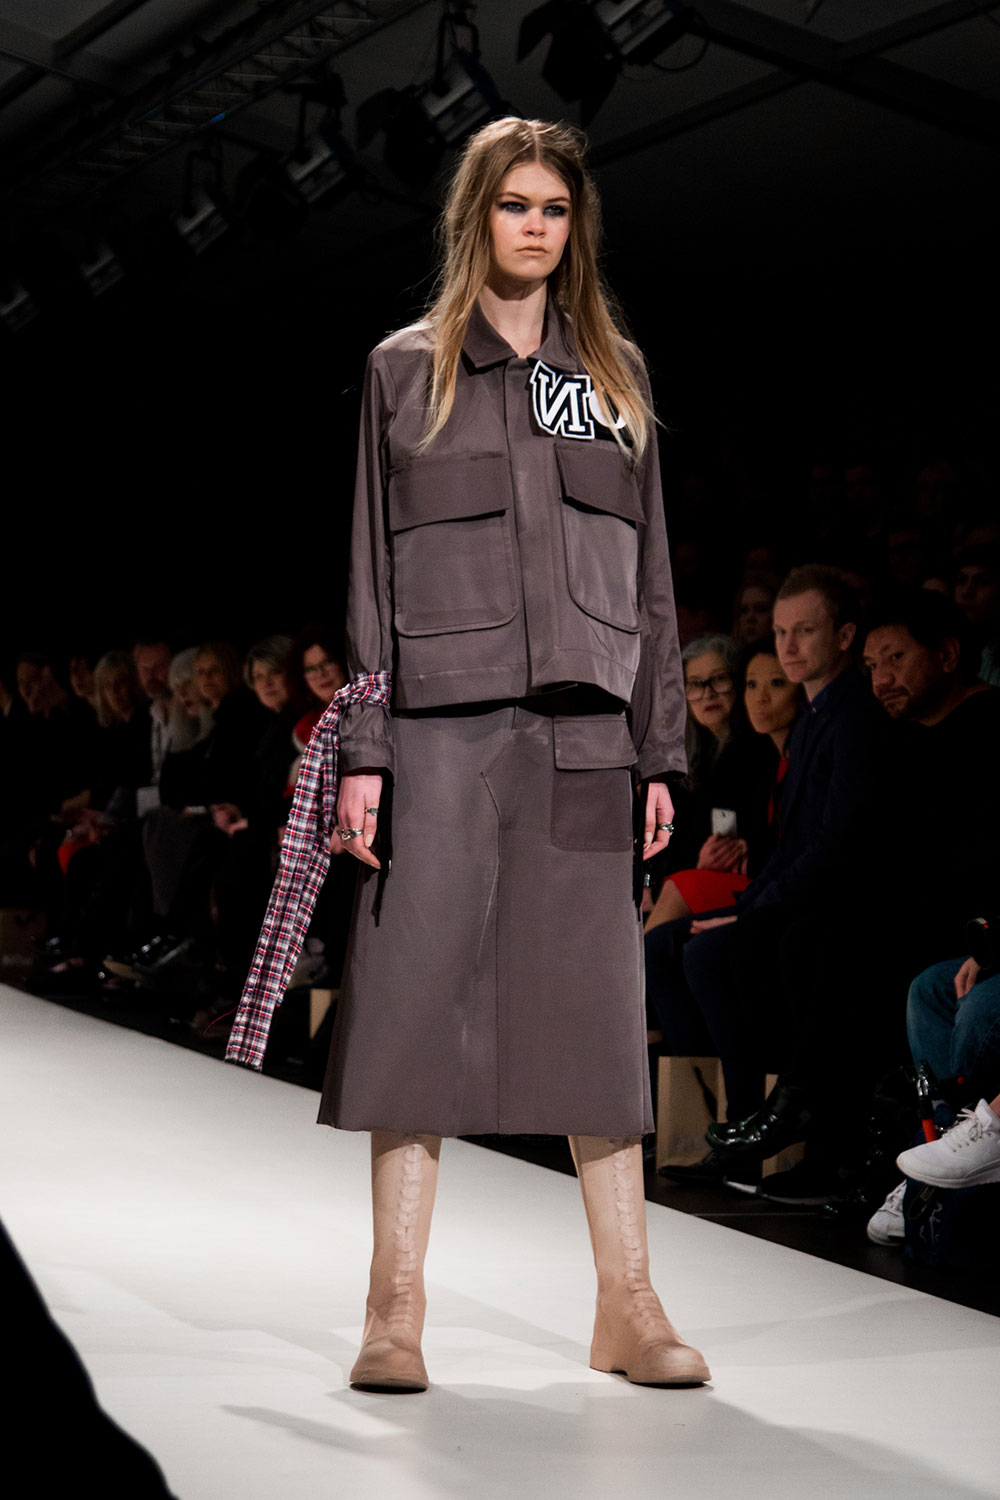 NOMd at NZFW 2015